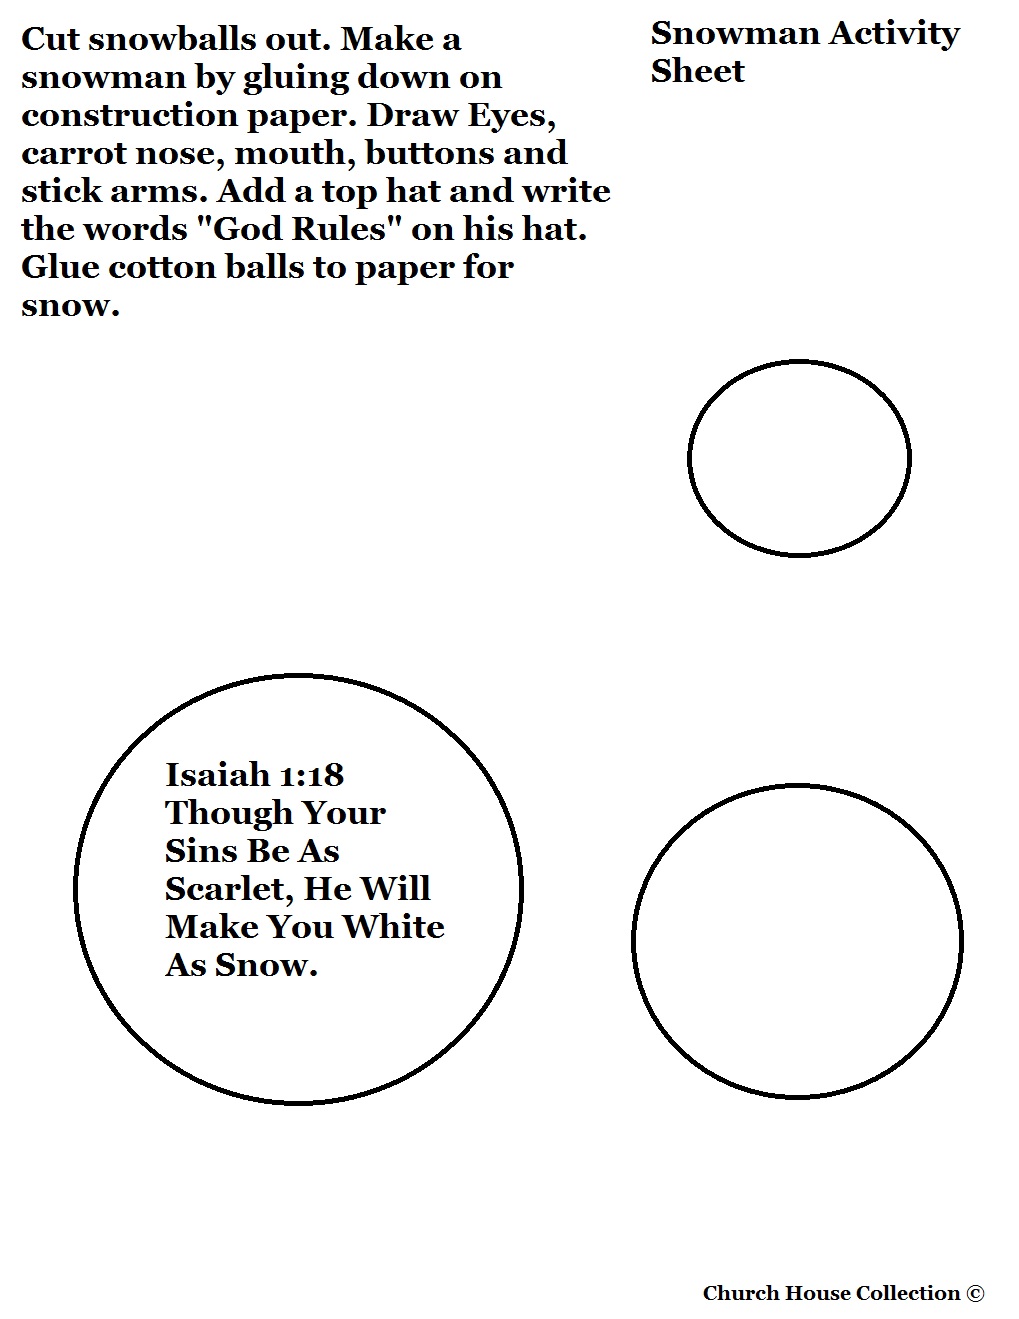 Free Christmas Snowman Cutout Craft For Sunday School Kids By Church House Collection. Snowman Printable Template Cutout Activity for Preschoolers and Toddlers.